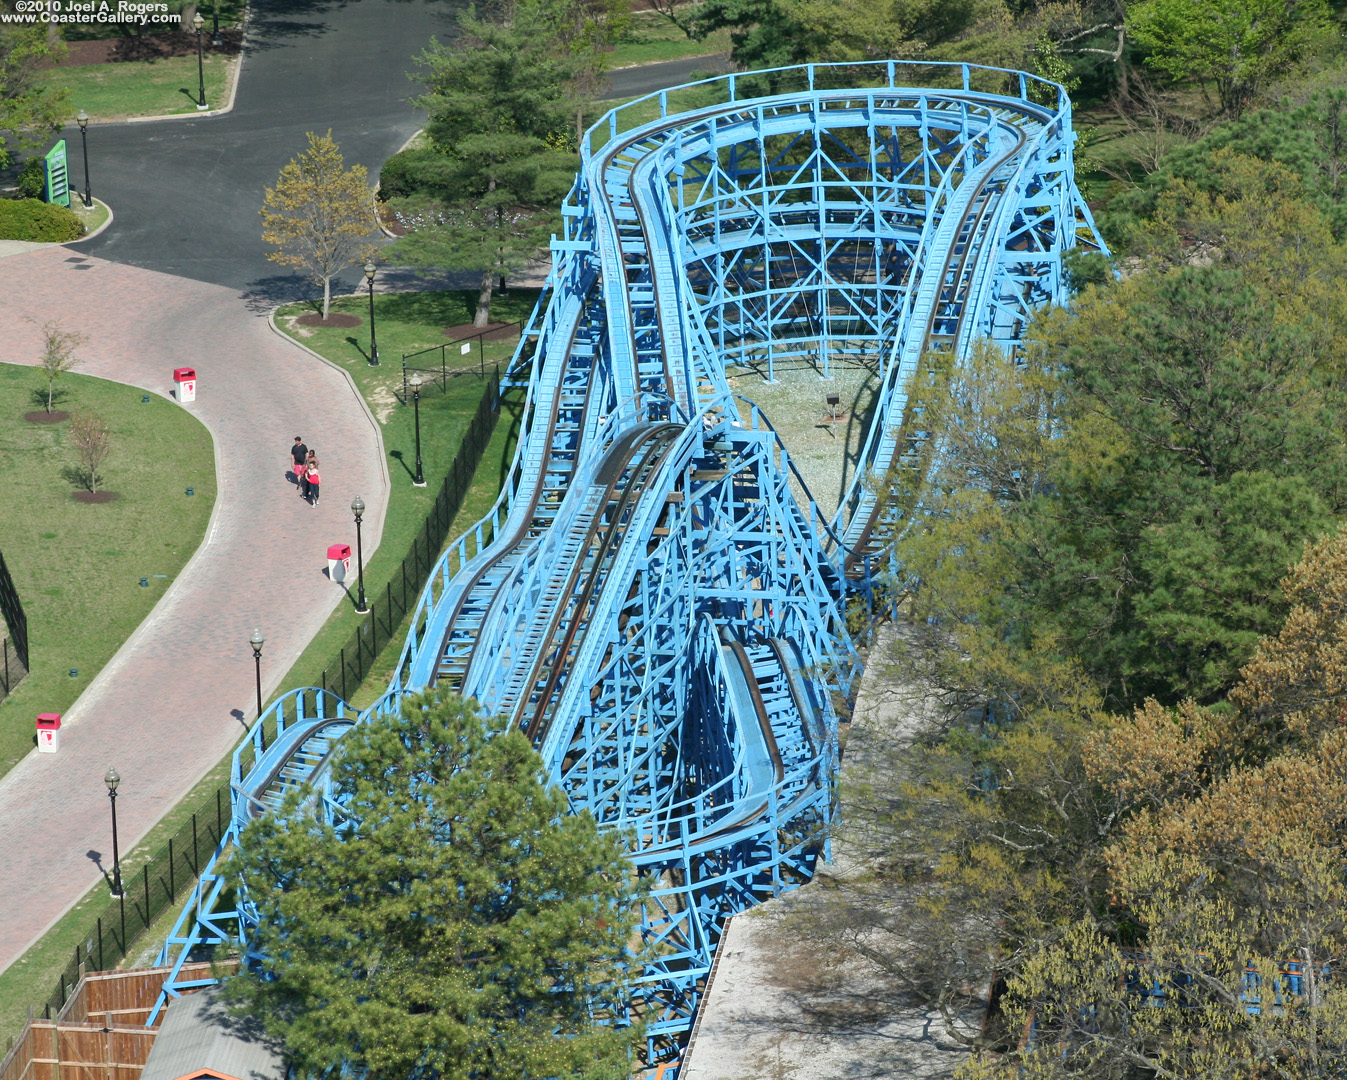 Former ACE Coaster Classic